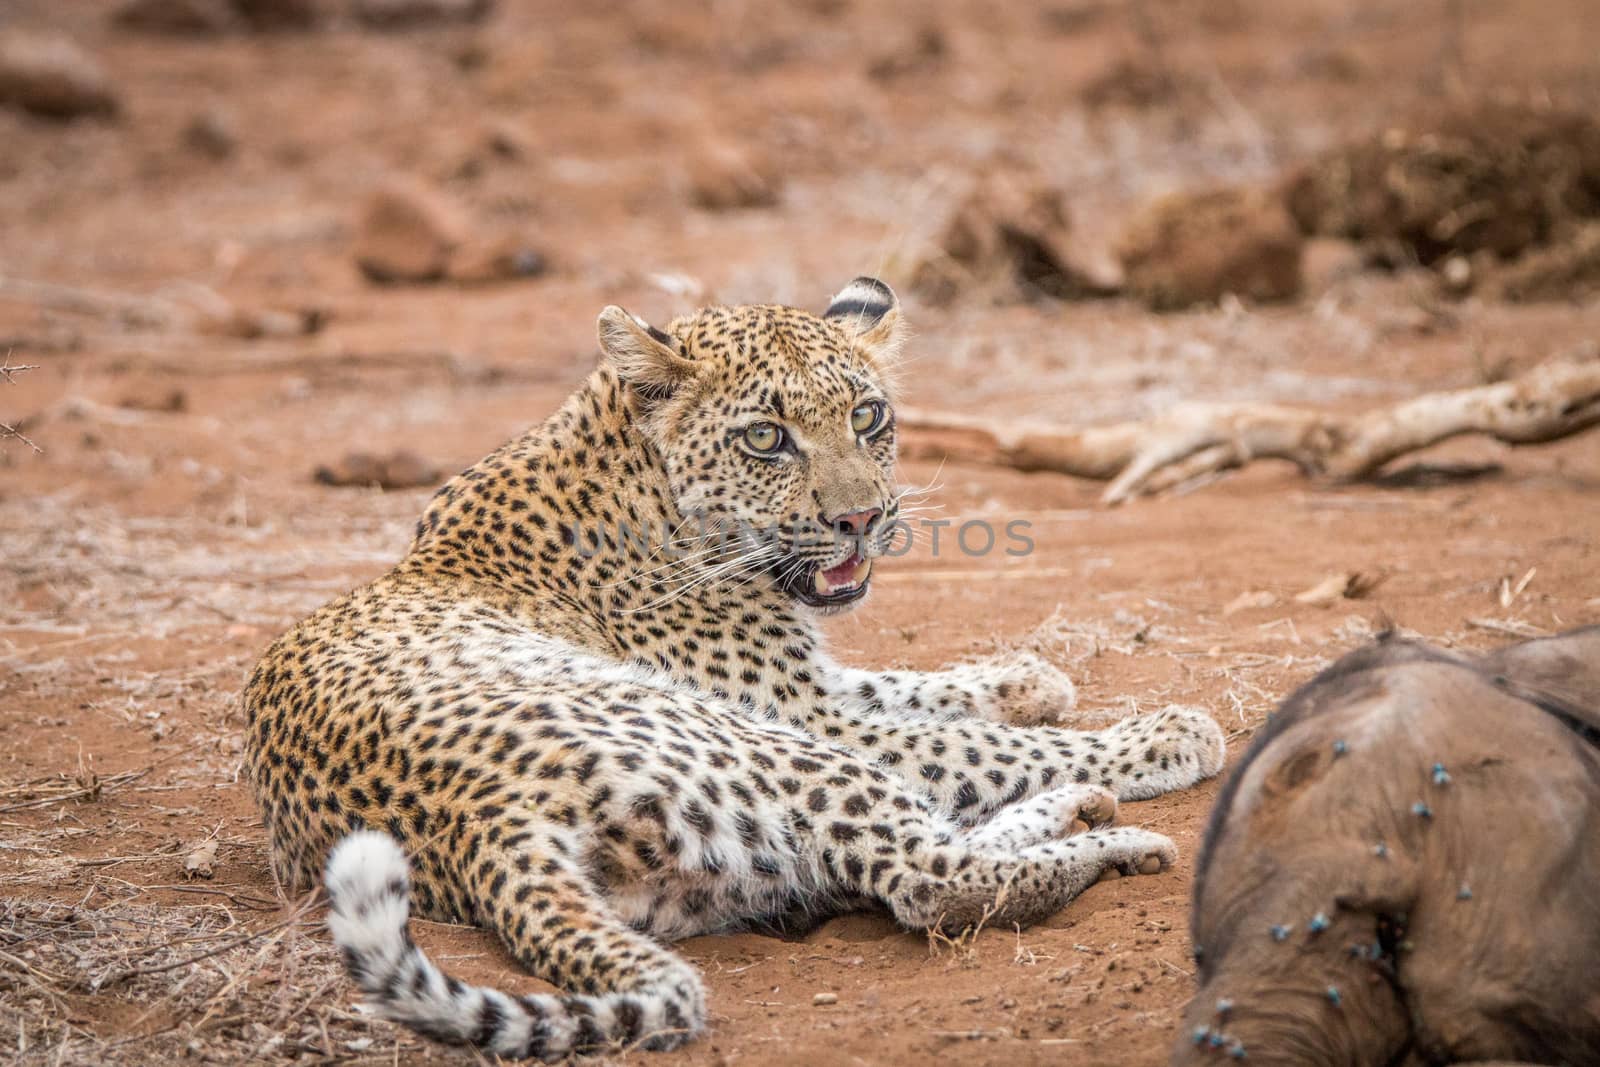 Leopard laying next to a baby Elephant carcass in the Kruger National Park, South Africa.